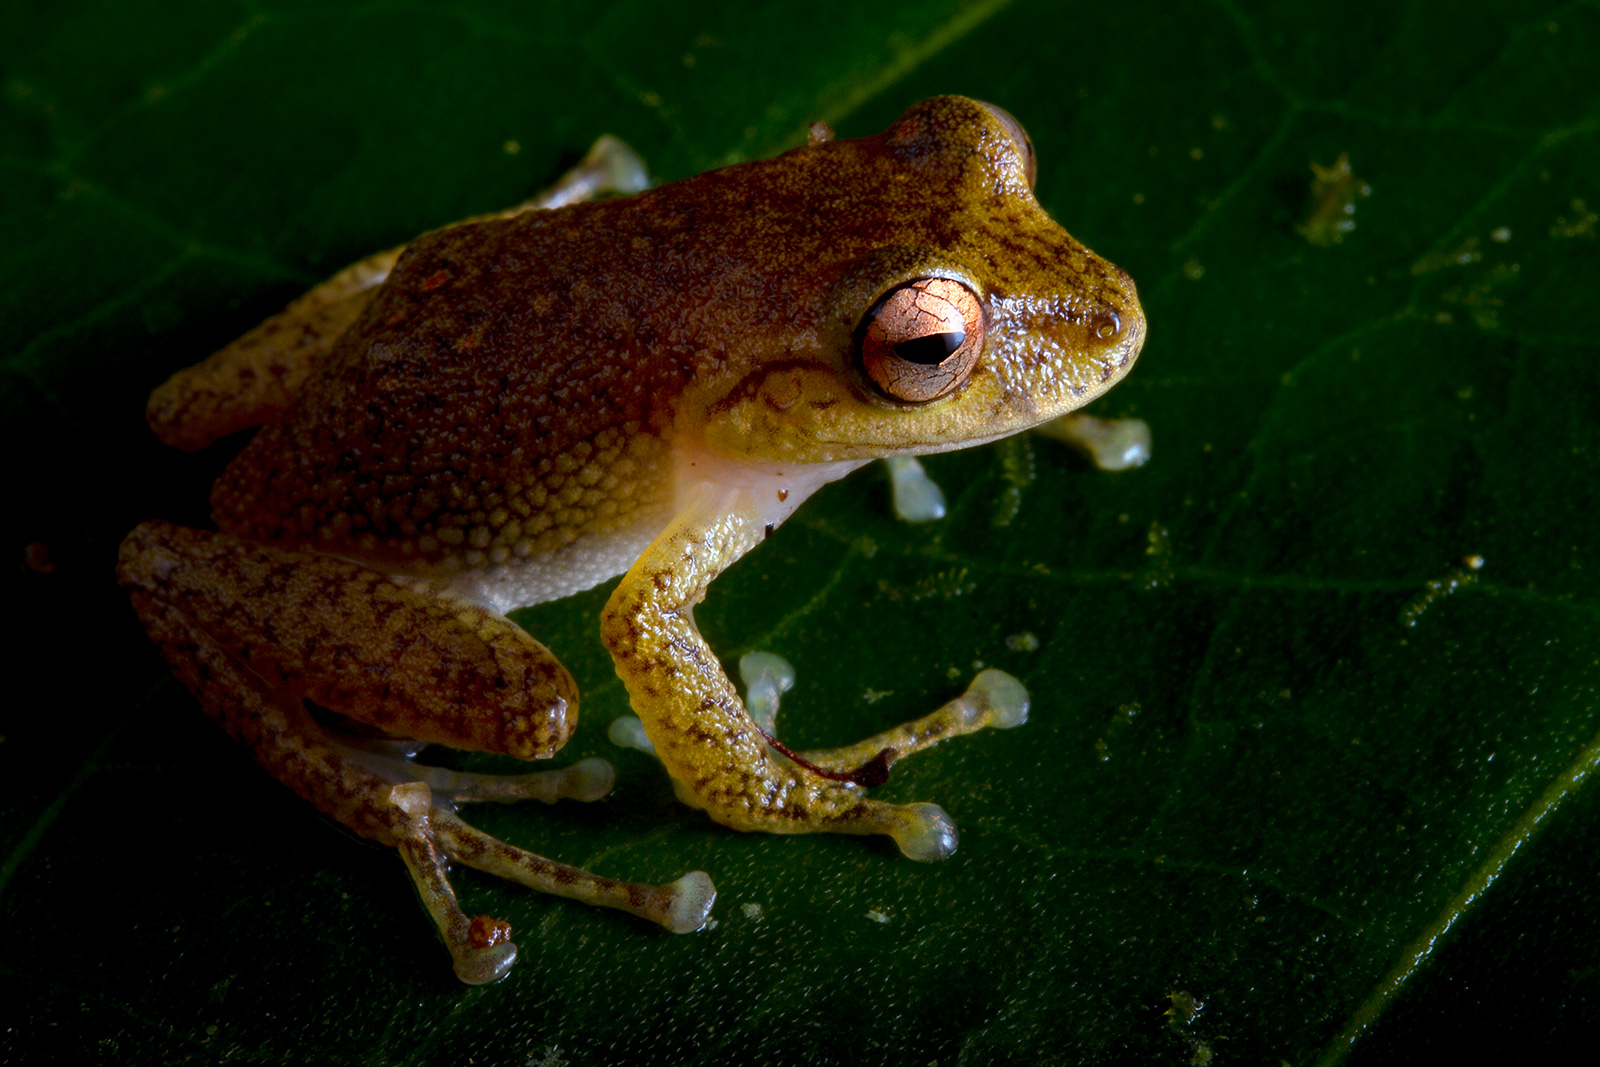 Picture of an Eugenia's Rainfrog (Pristimantis eugeniae), photographed using the Canon 60mm Macro Lens